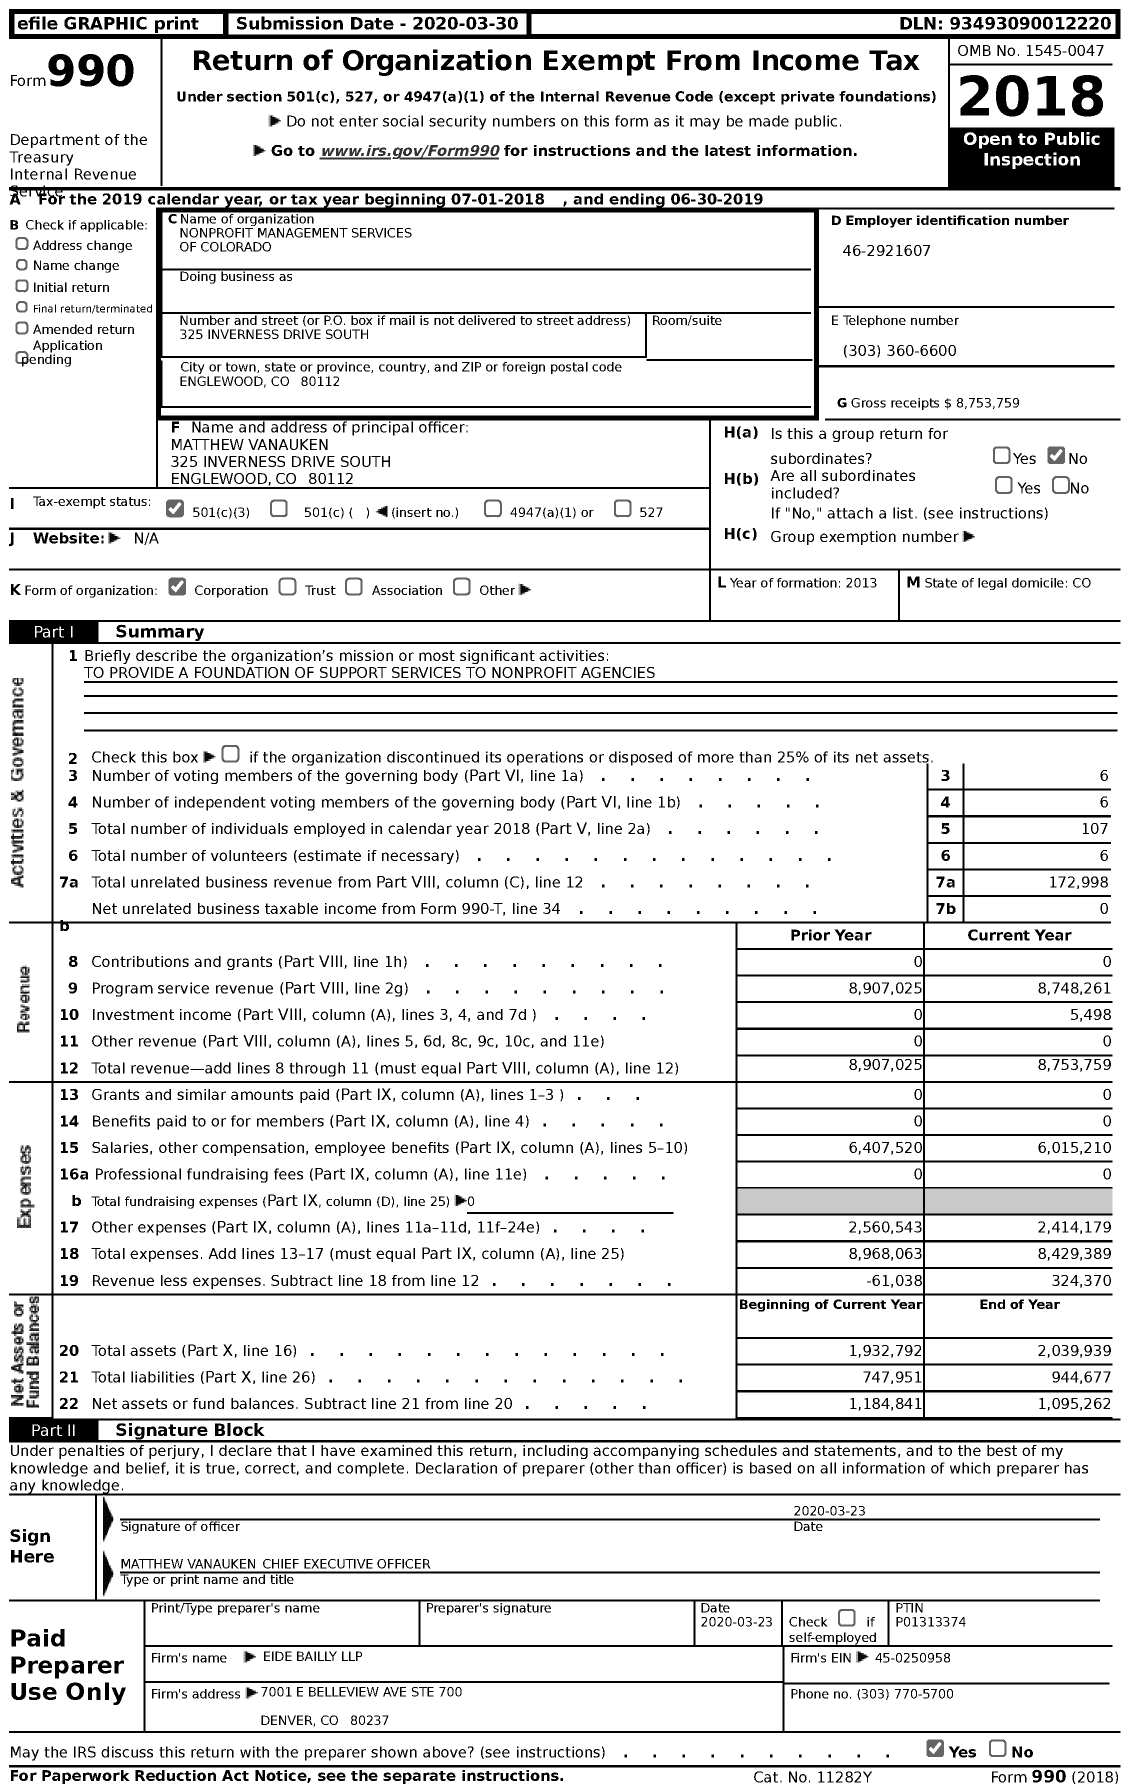 Image of first page of 2018 Form 990 for Nonprofit Management Services of Colorado (NMSC)